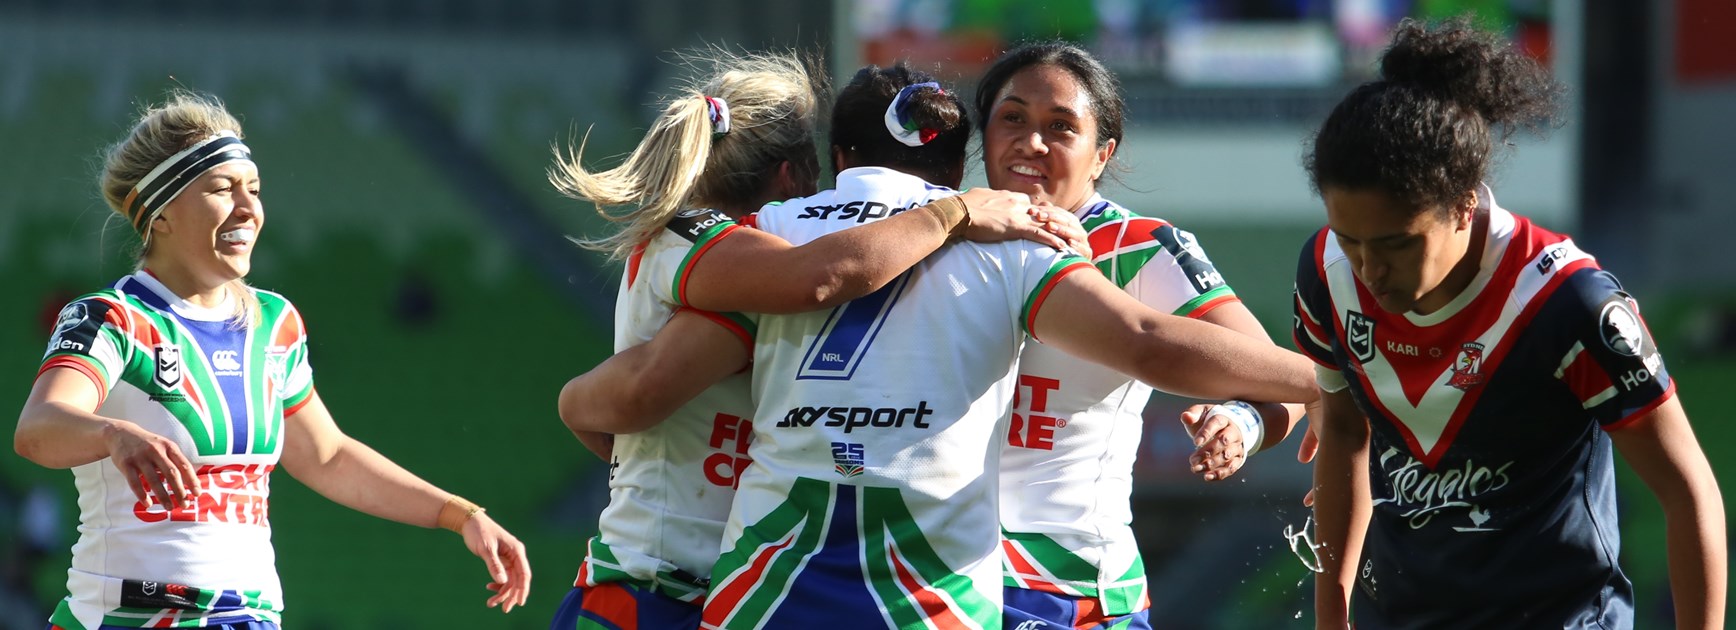 The Warriors congratulate halfback Charntay Poko after her try against the Roosters.